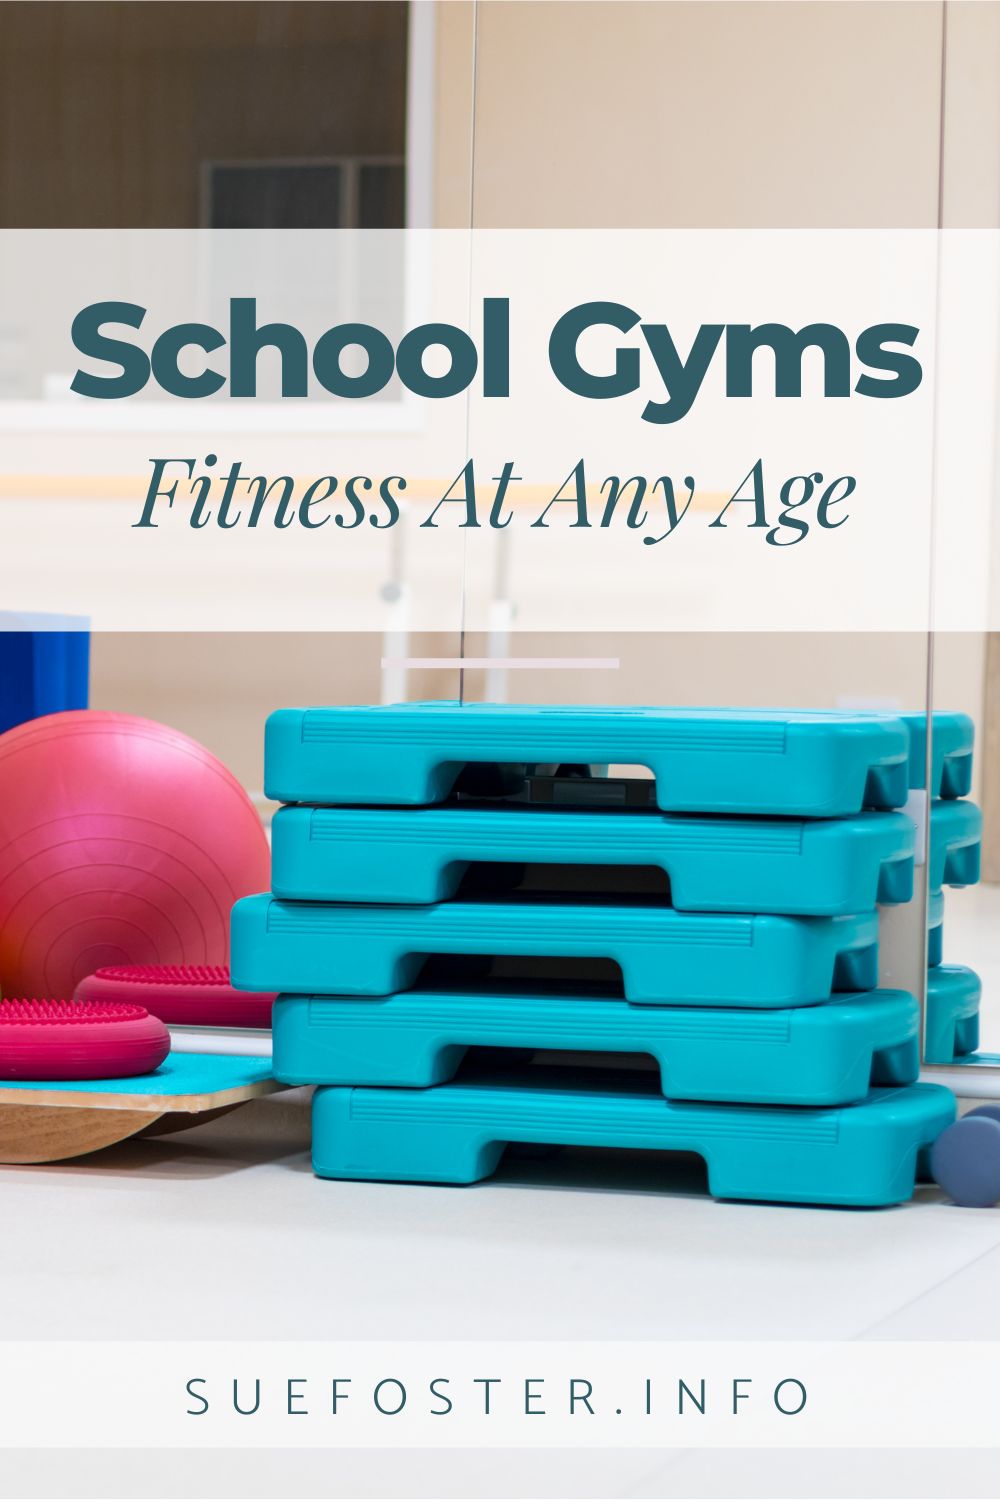 Though school gyms are often seen as places for school-aged children to stay fit, they can be used by people of all ages. Many adults find that school gyms offer a great way to get in shape and stay healthy.